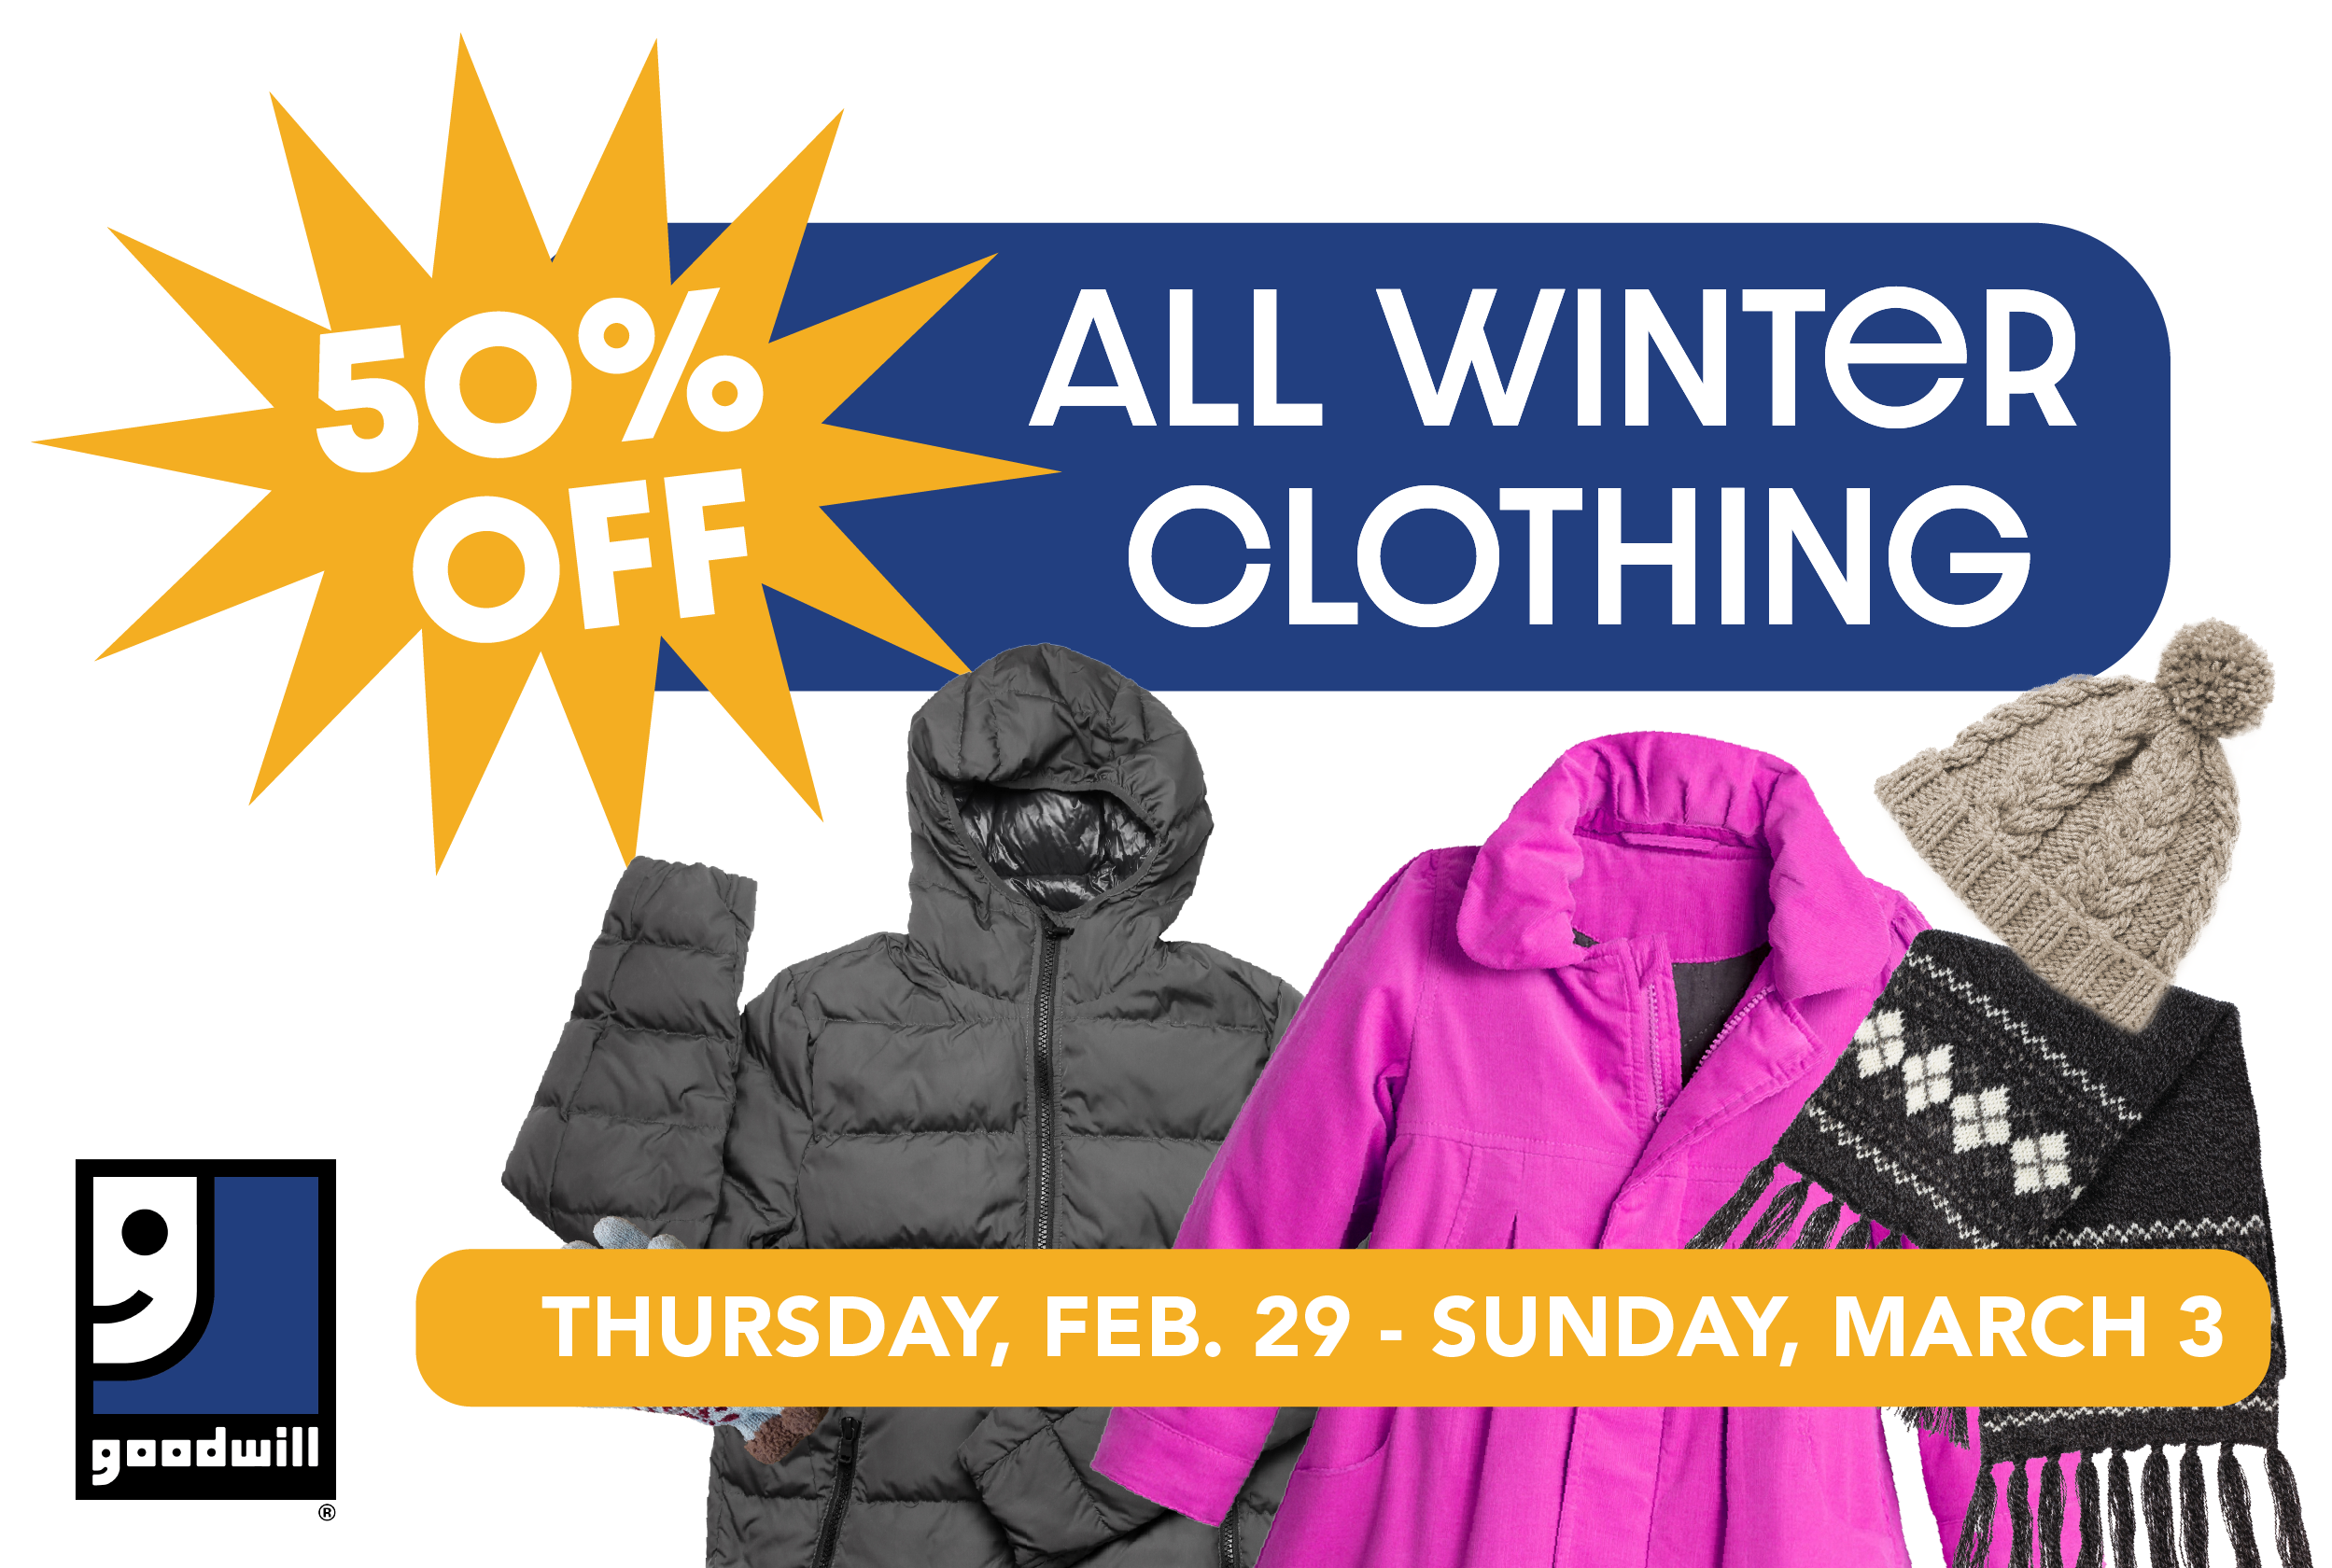 Goodwill's Annual 50%-Off Winter Clearance Sale is March 2-5